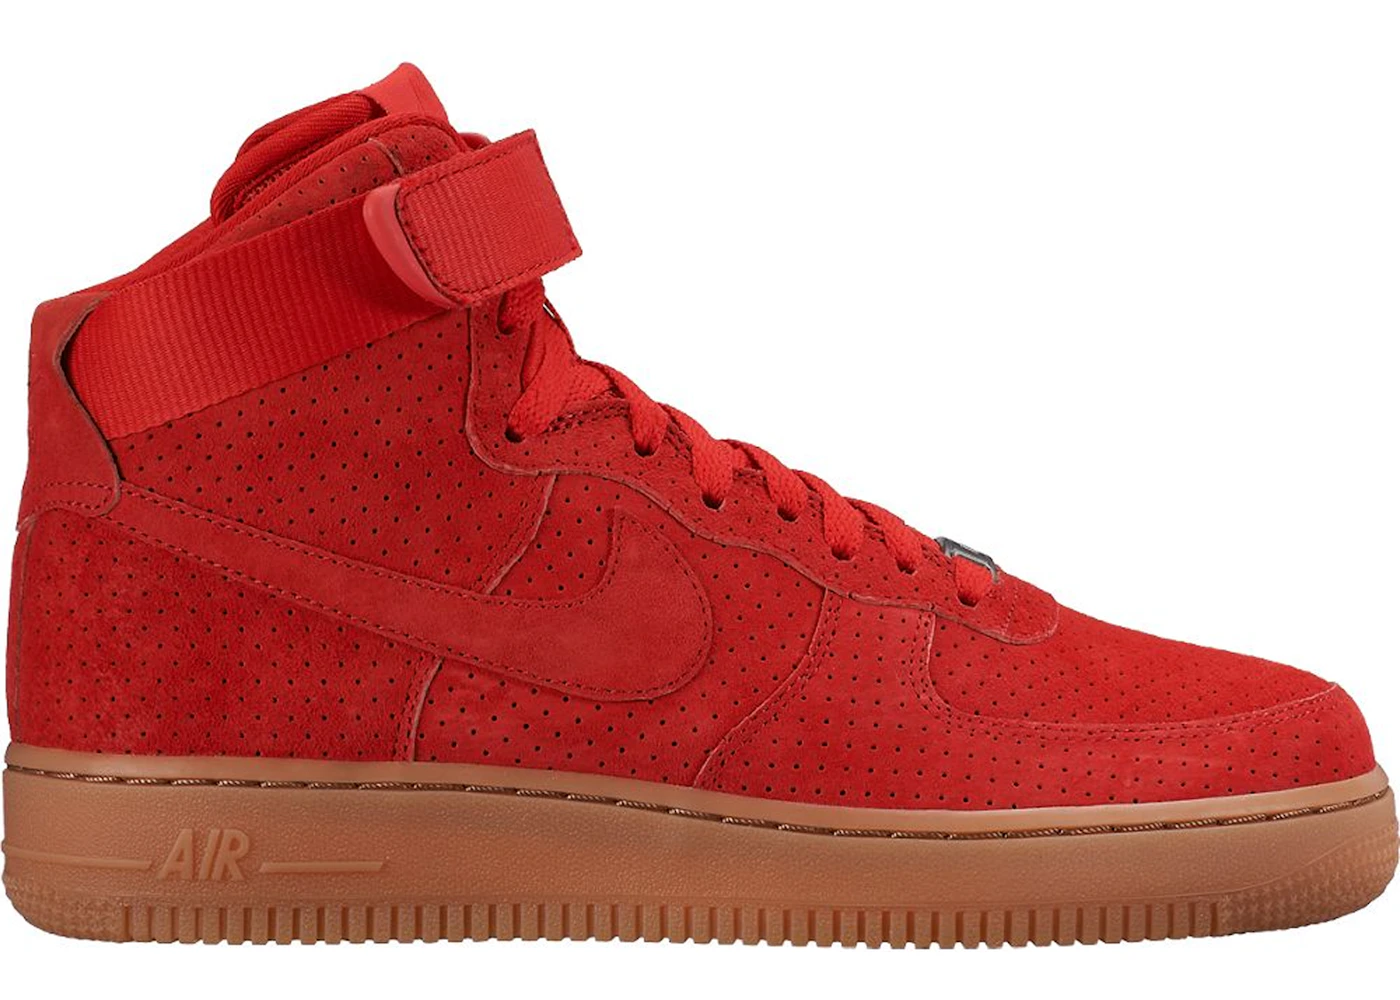 election like that Contraction Nike Air Force 1 High Suede University Red Gum (Women's) - 749266-601 - US